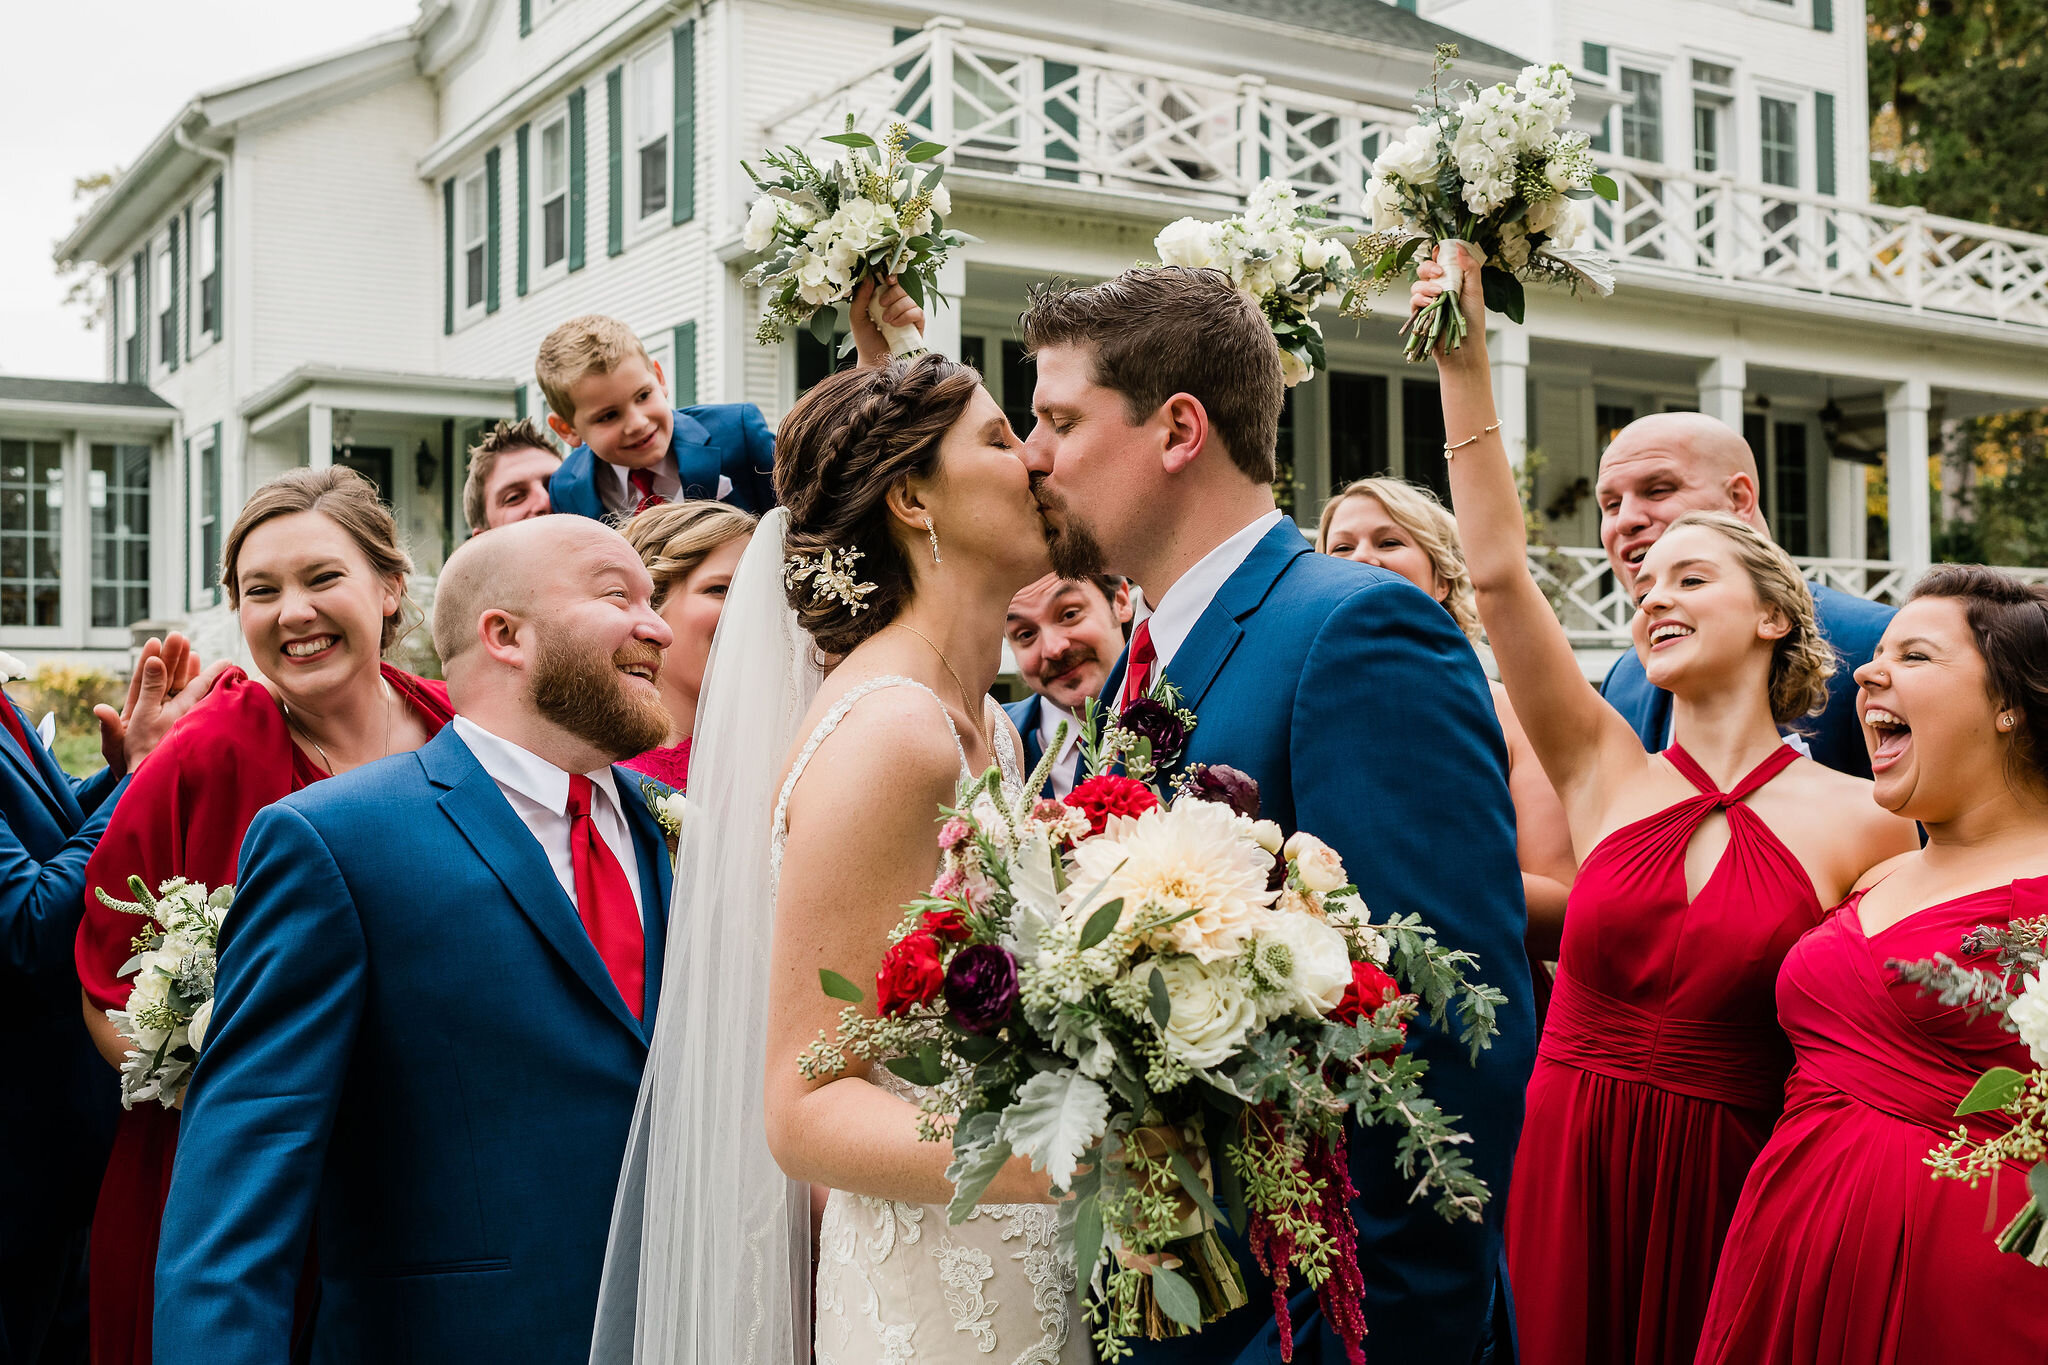 Bride and groom kissing while wedding party cheers